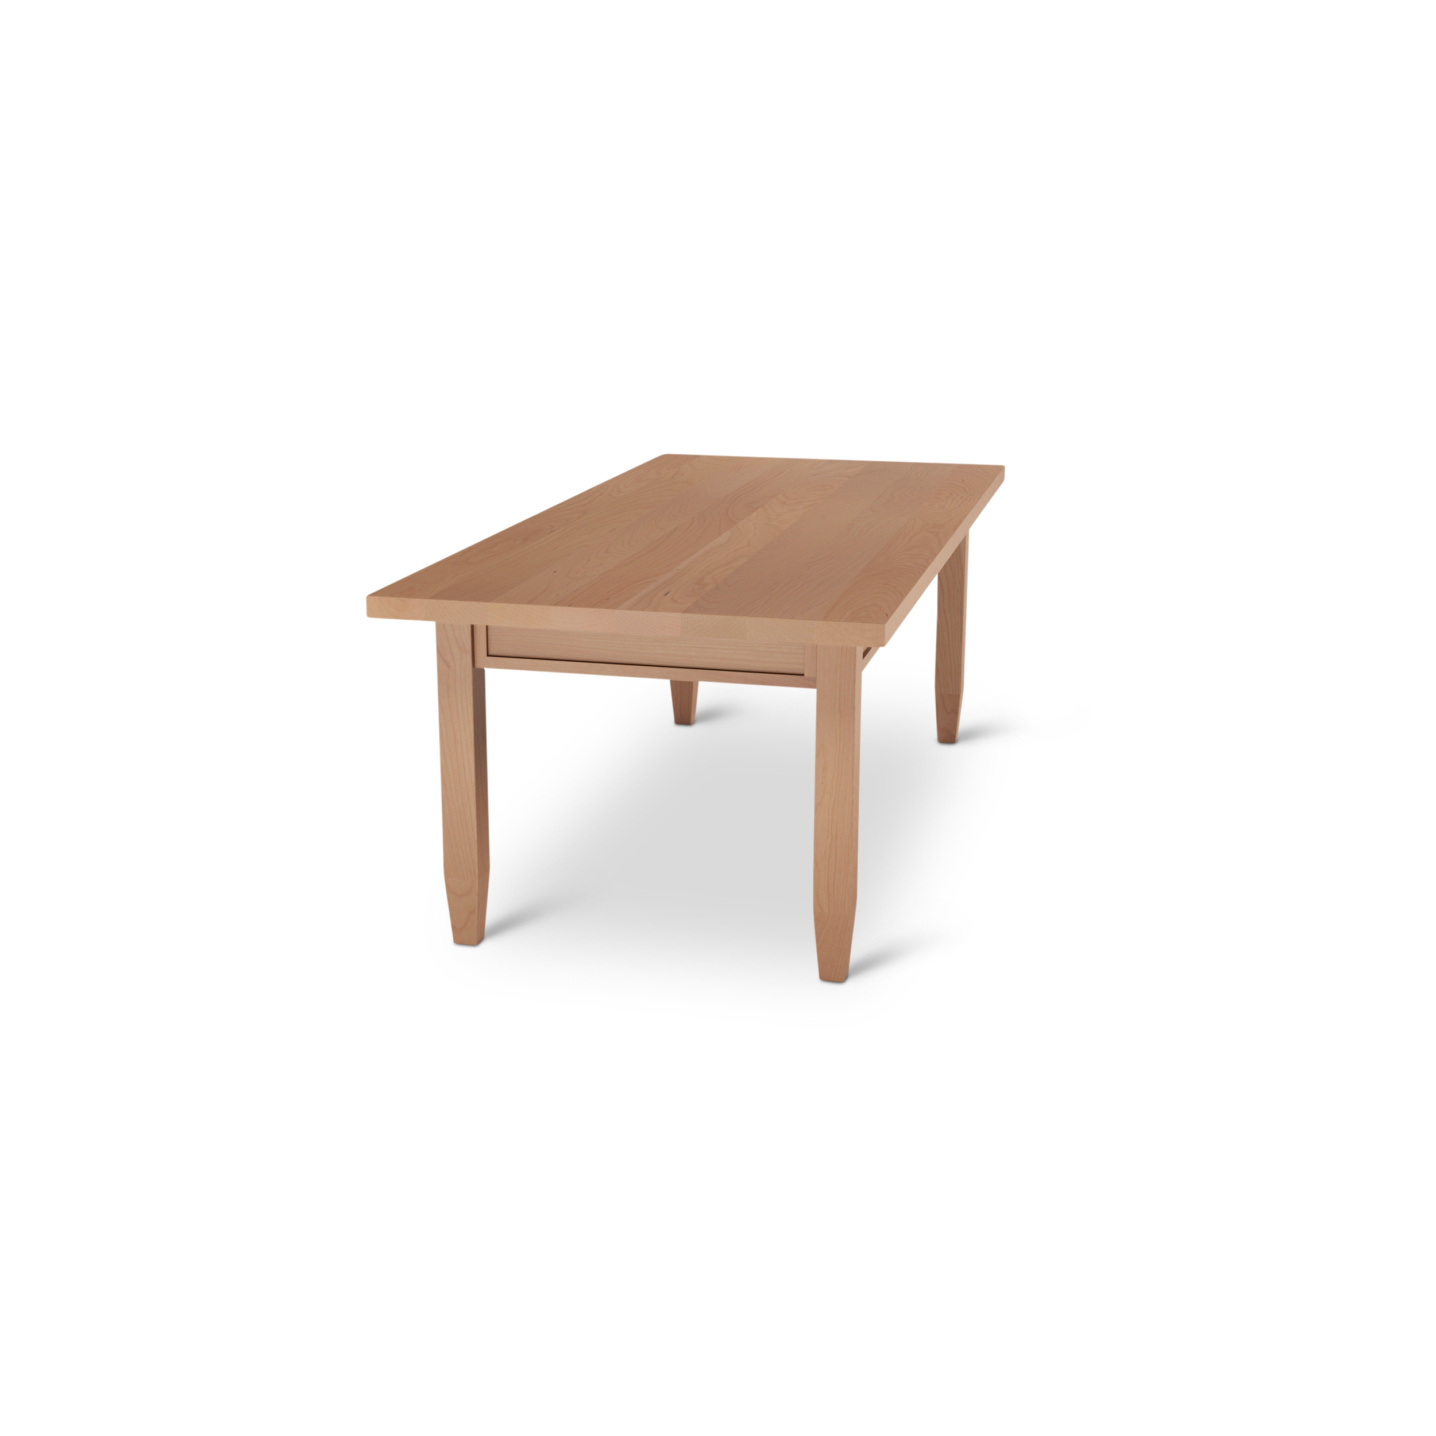 fine cherry solid wood table